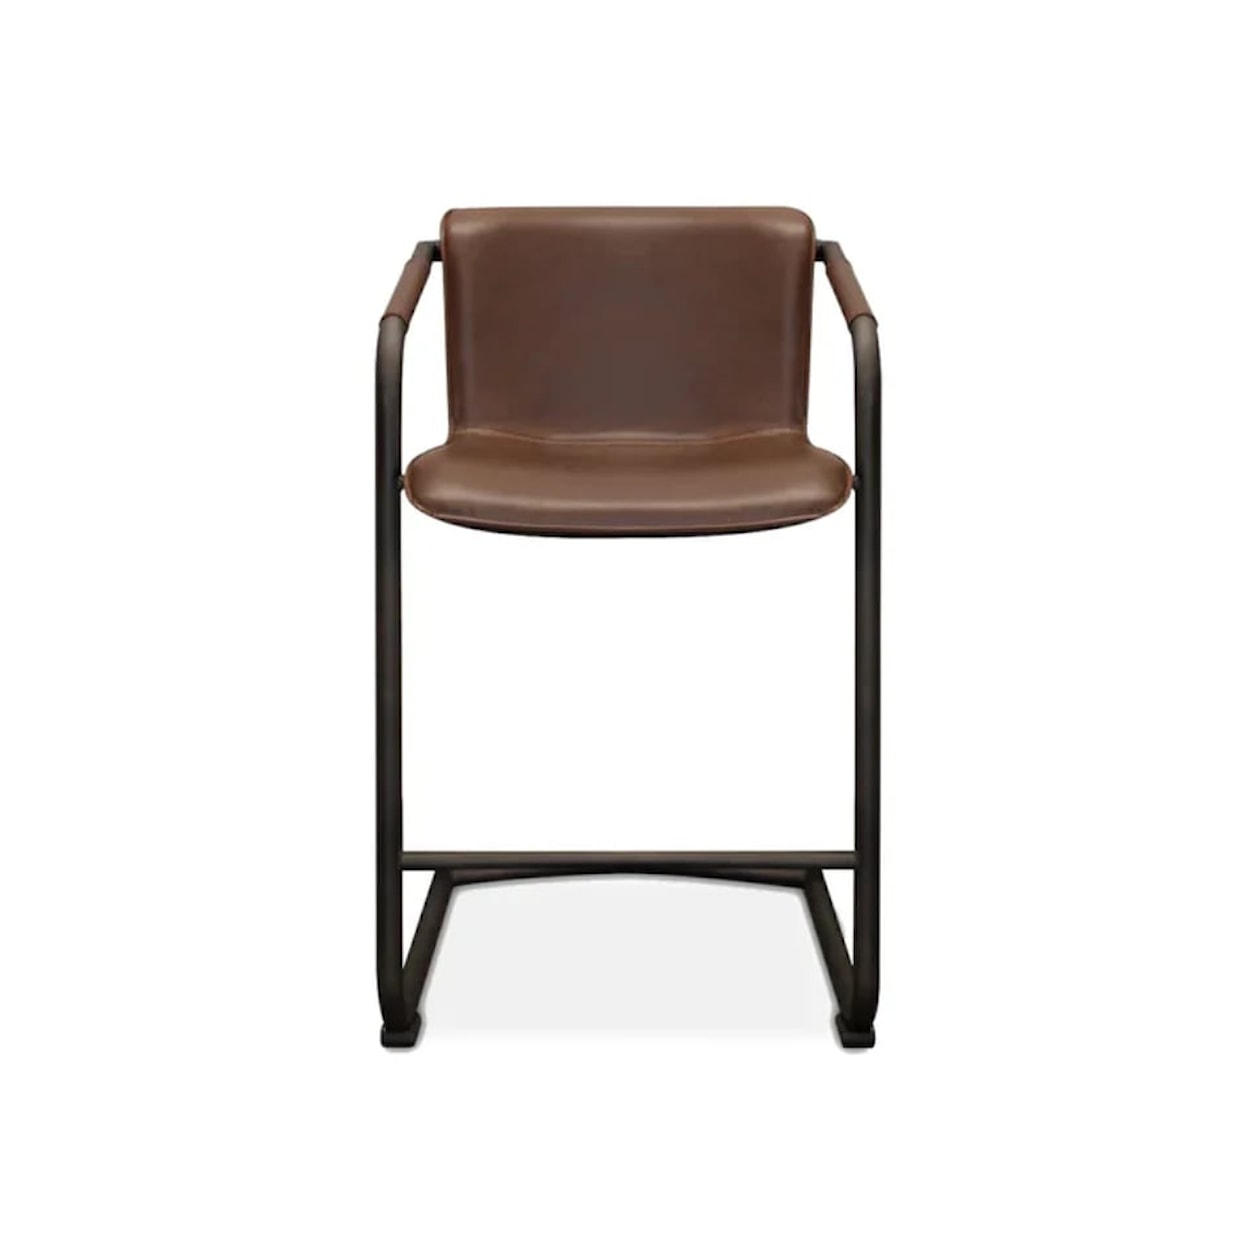 Primitive Collections Juno Barstool